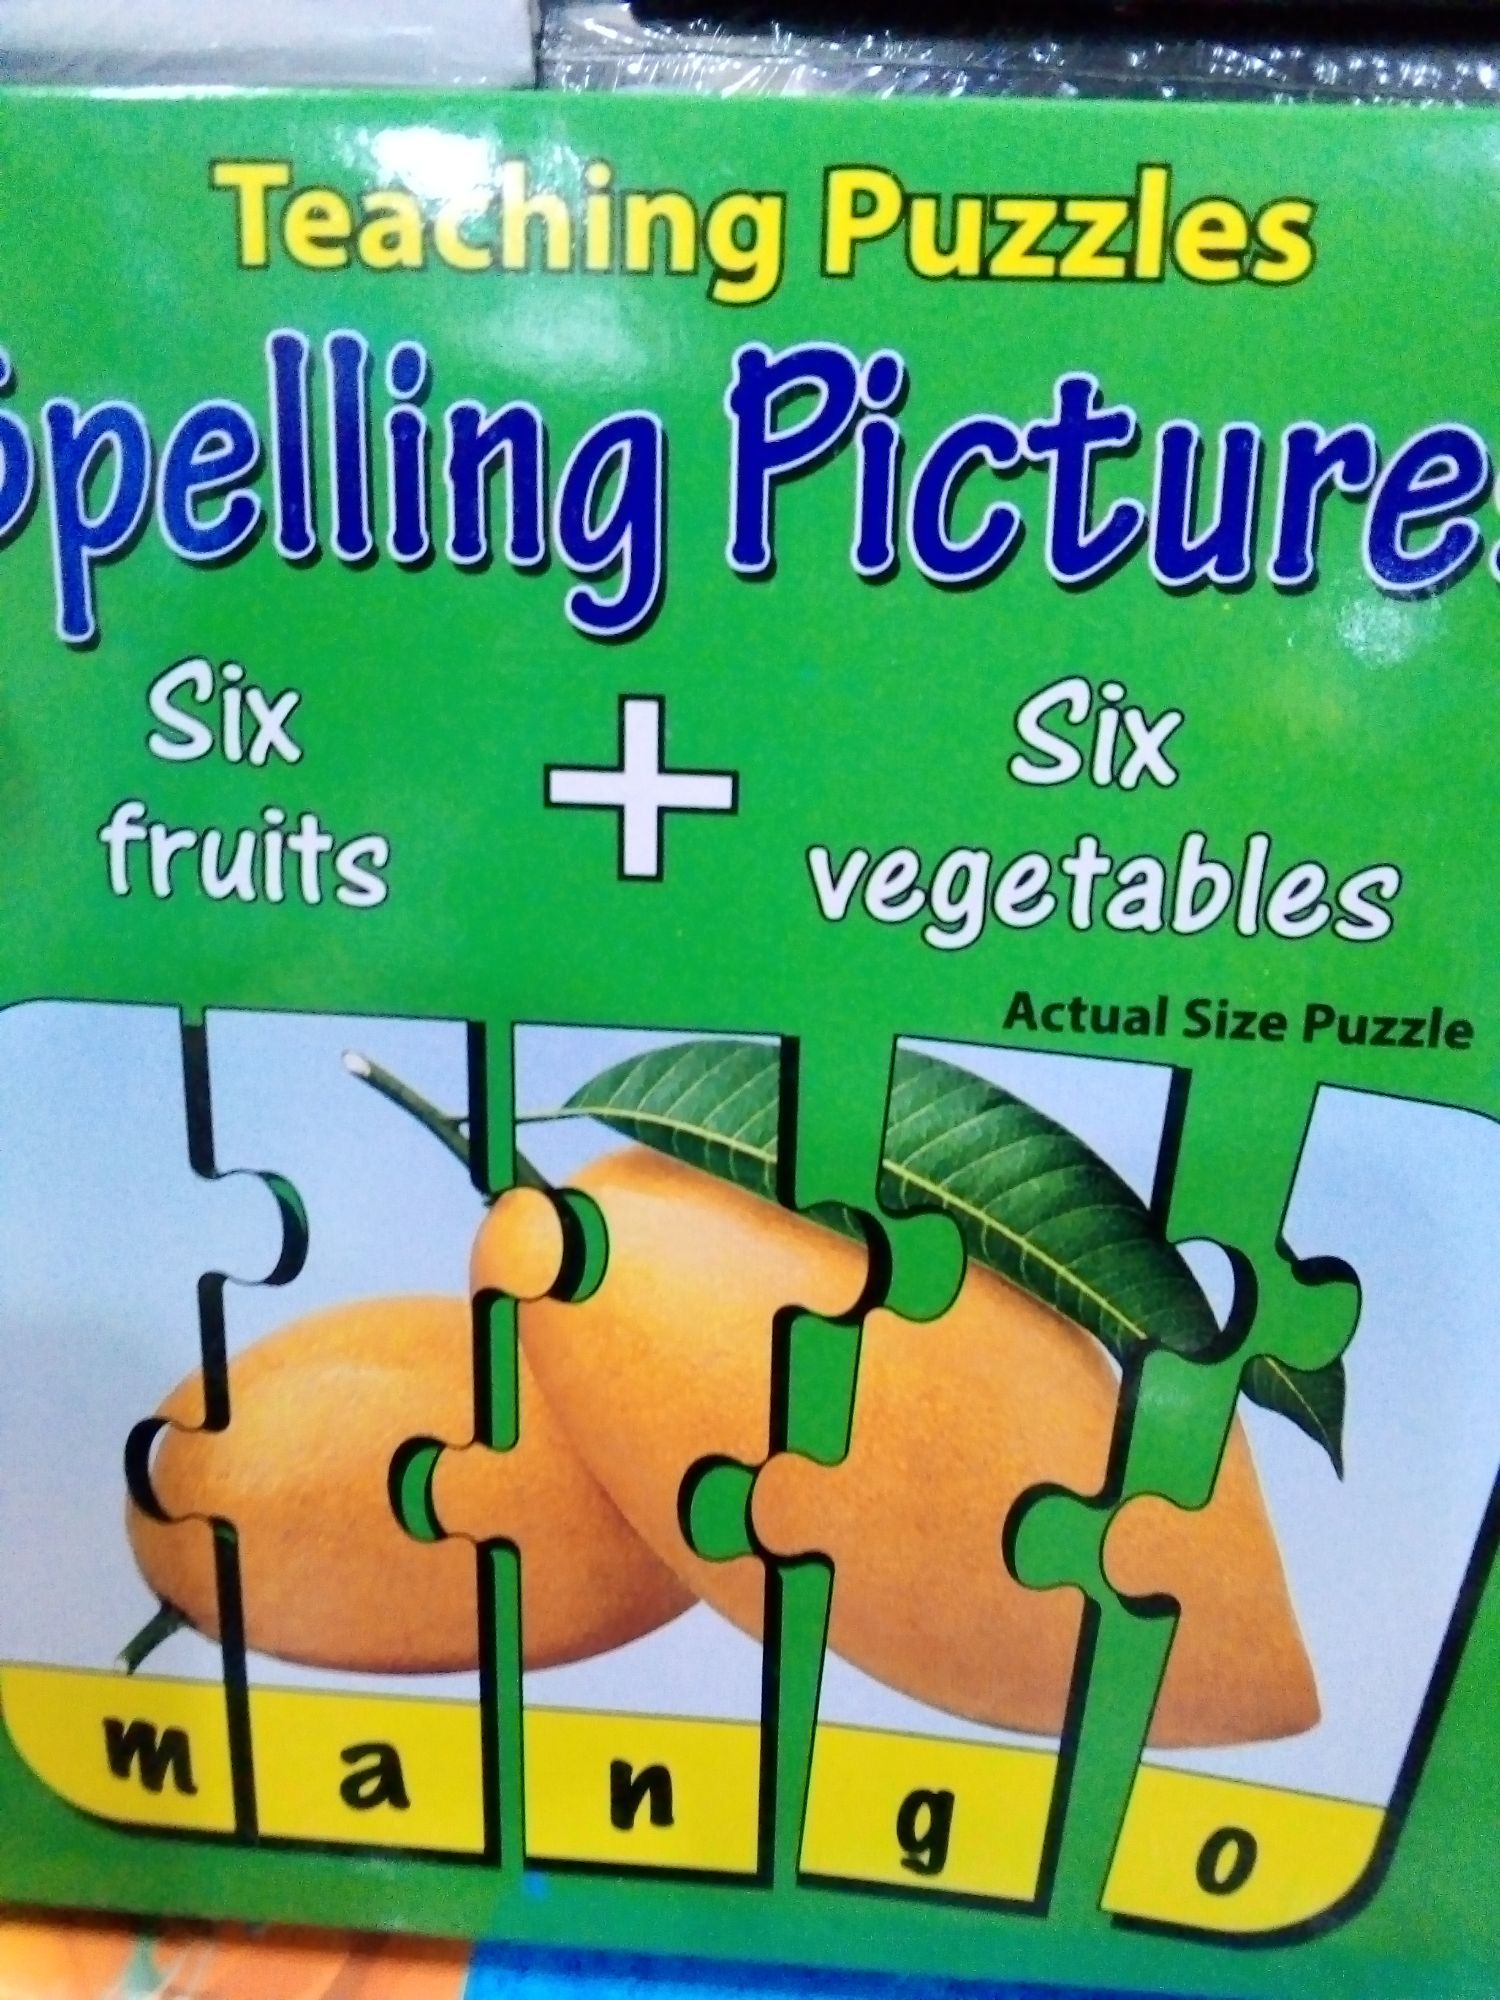 Match It! Spelling Puzzles - White